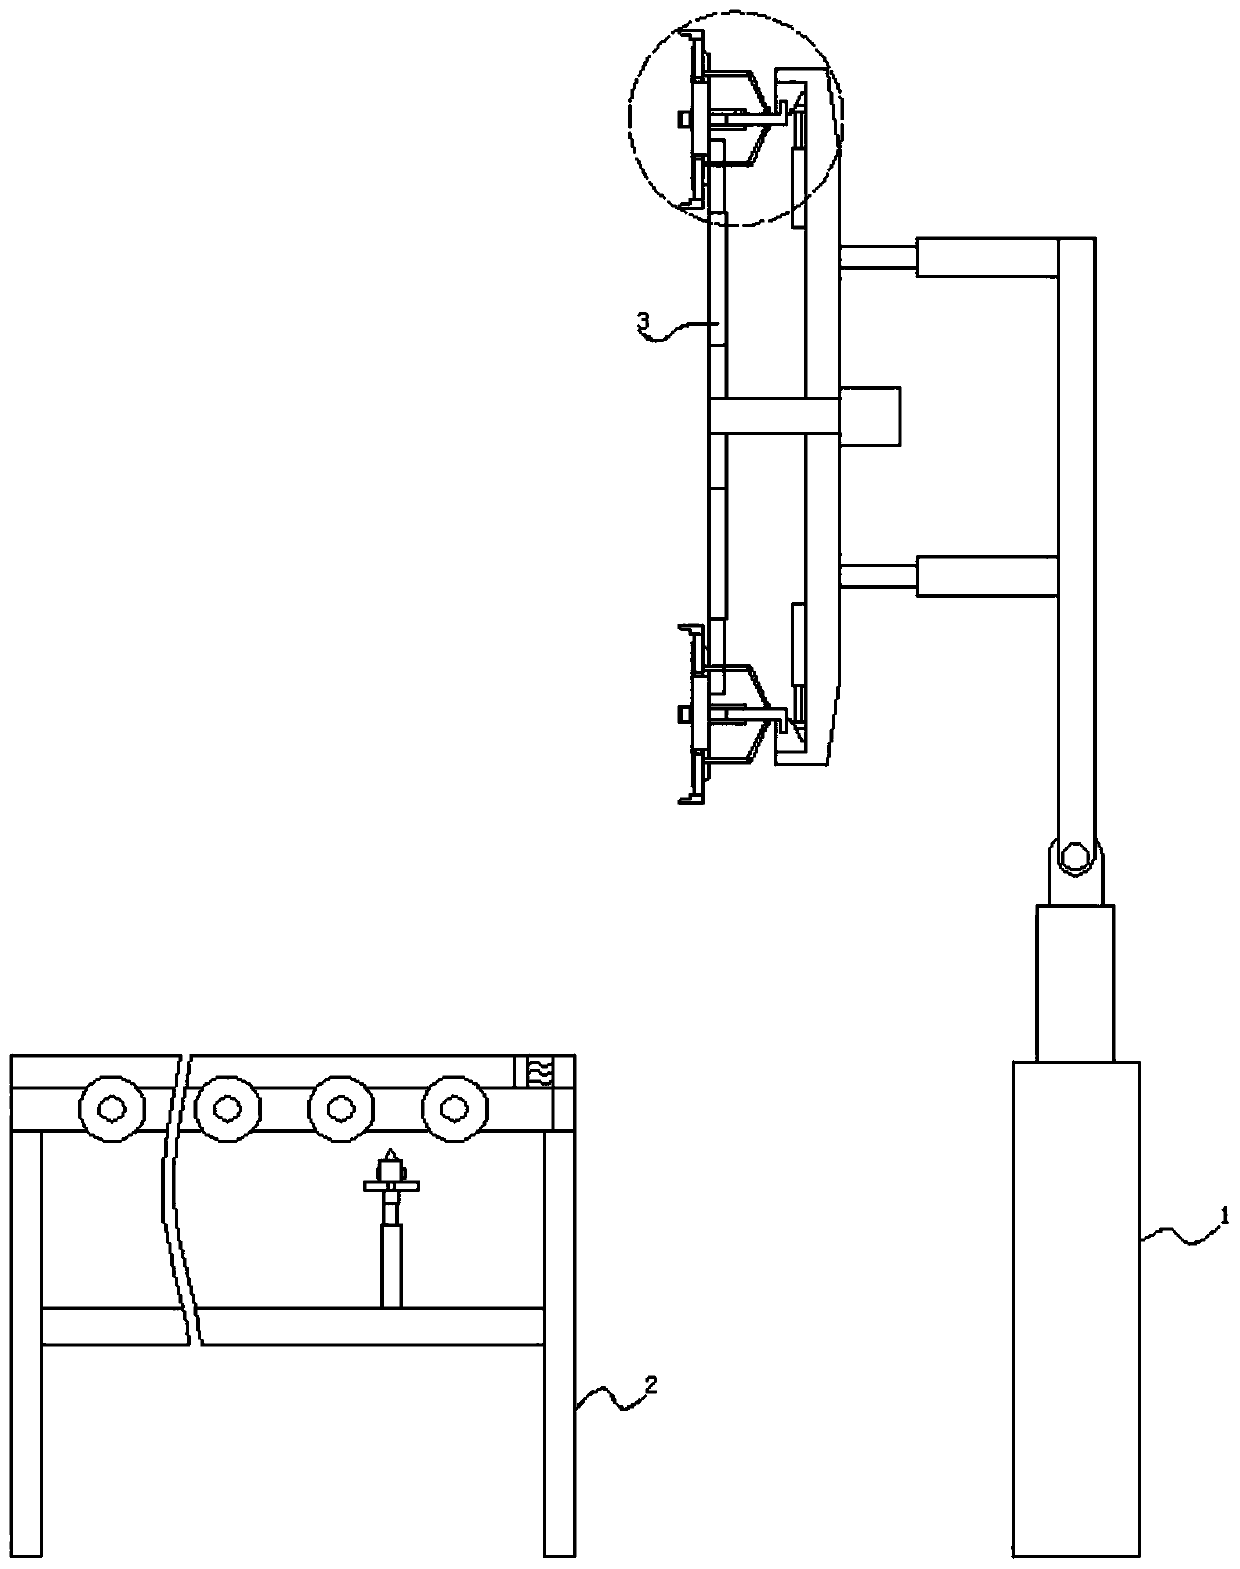 Auxiliary equipment for motor end cover processing